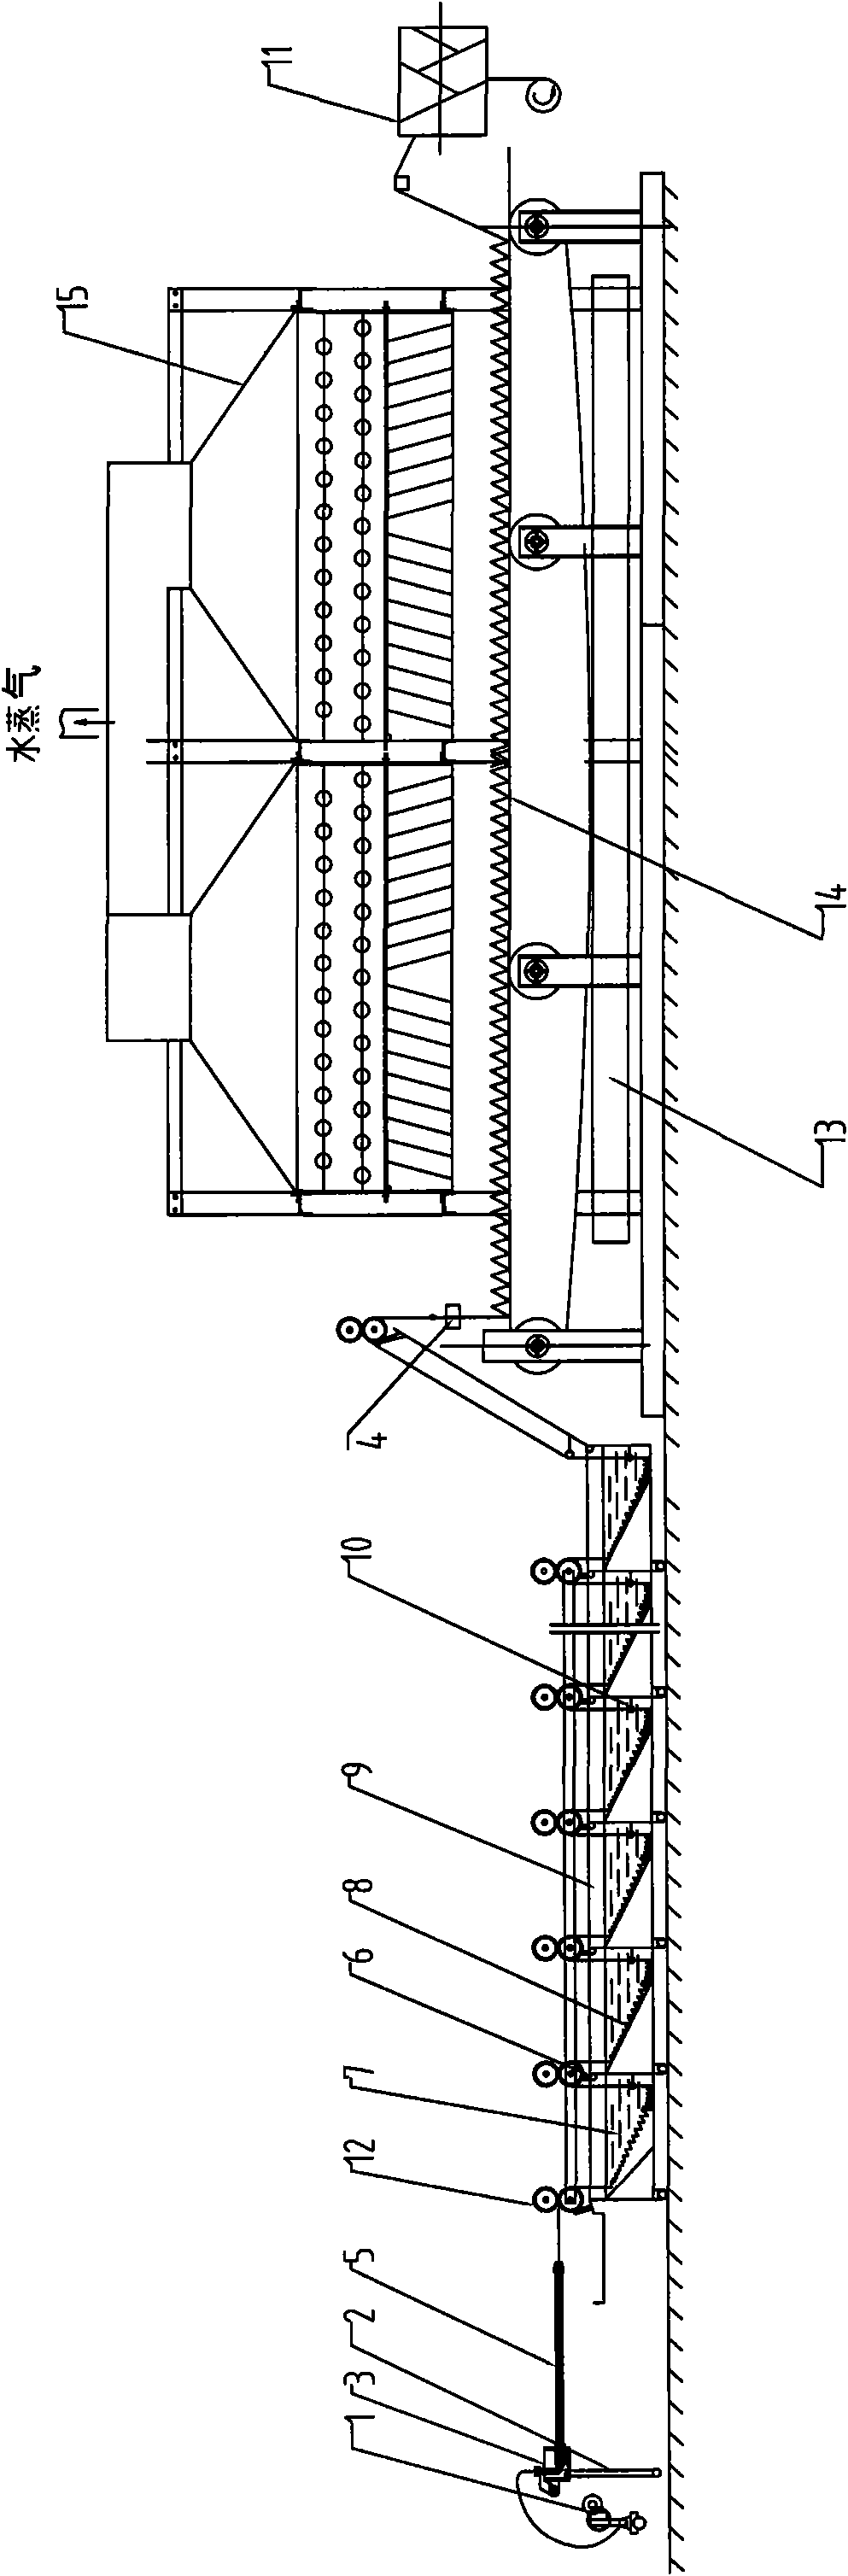 Continuous spinning process for viscose coarse denier flat filament